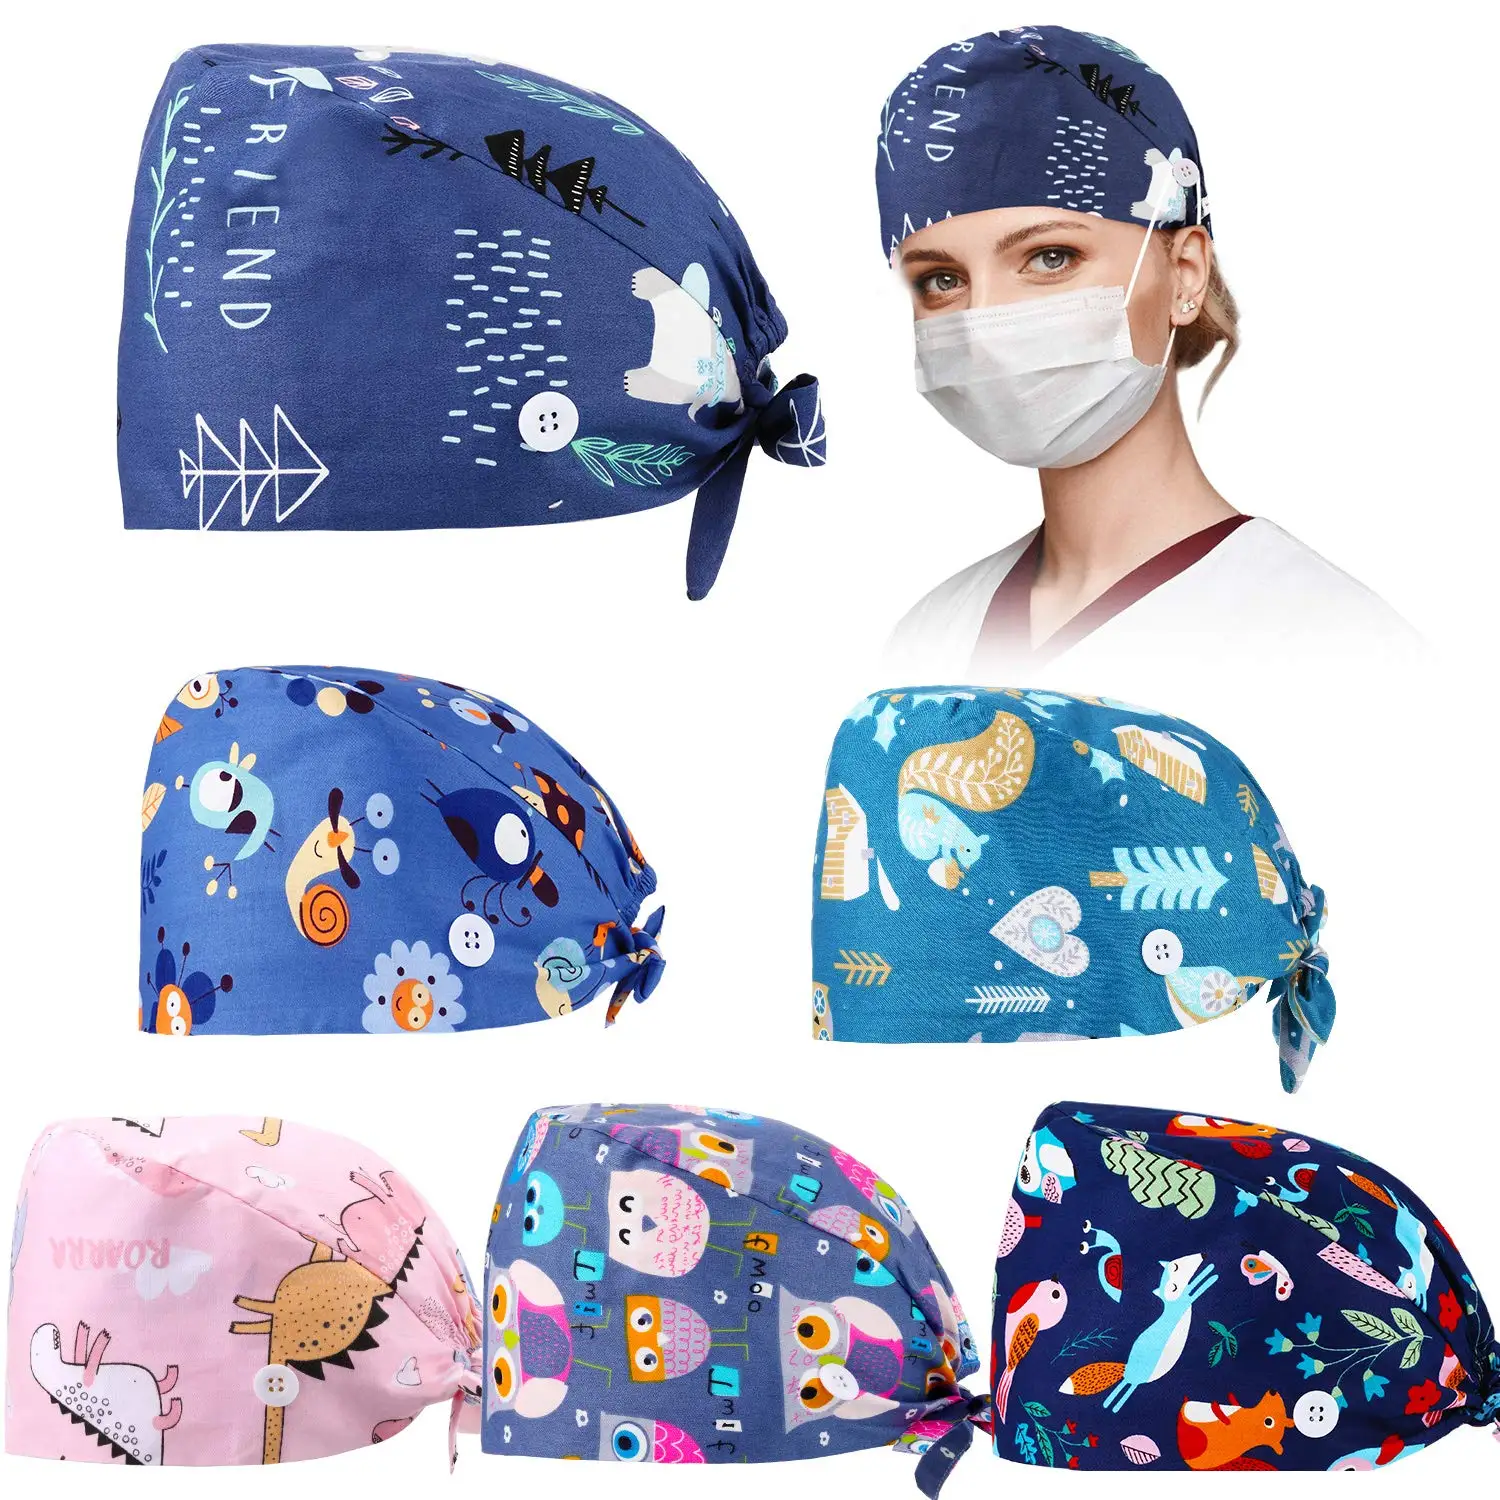 

Surgica Print Scrub Working Hat With Buttons Adjustable Sweatband Bouffant Hats Unisex Tie Back Cap Elastic Nurse Accessories